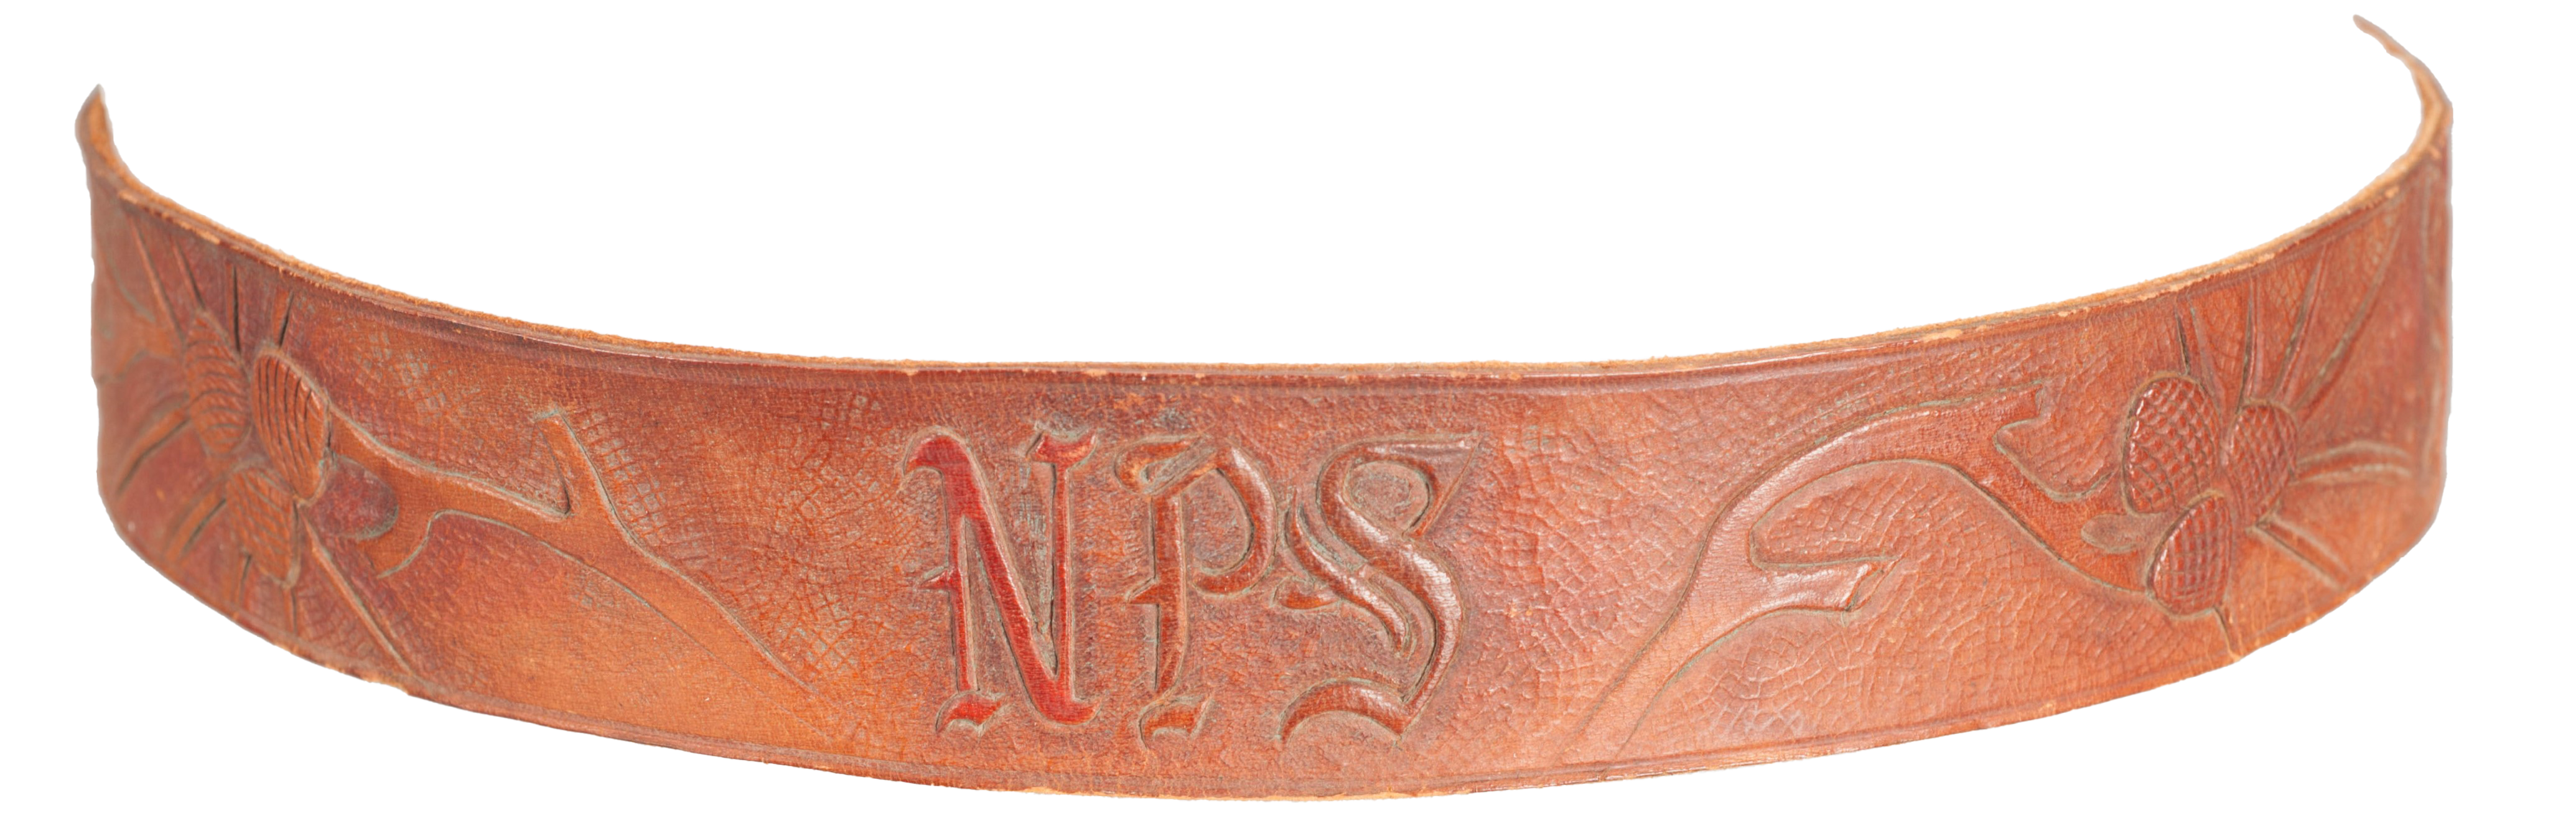 Reddish-brown leather hatband with "NPS" and branches with sequoia cones